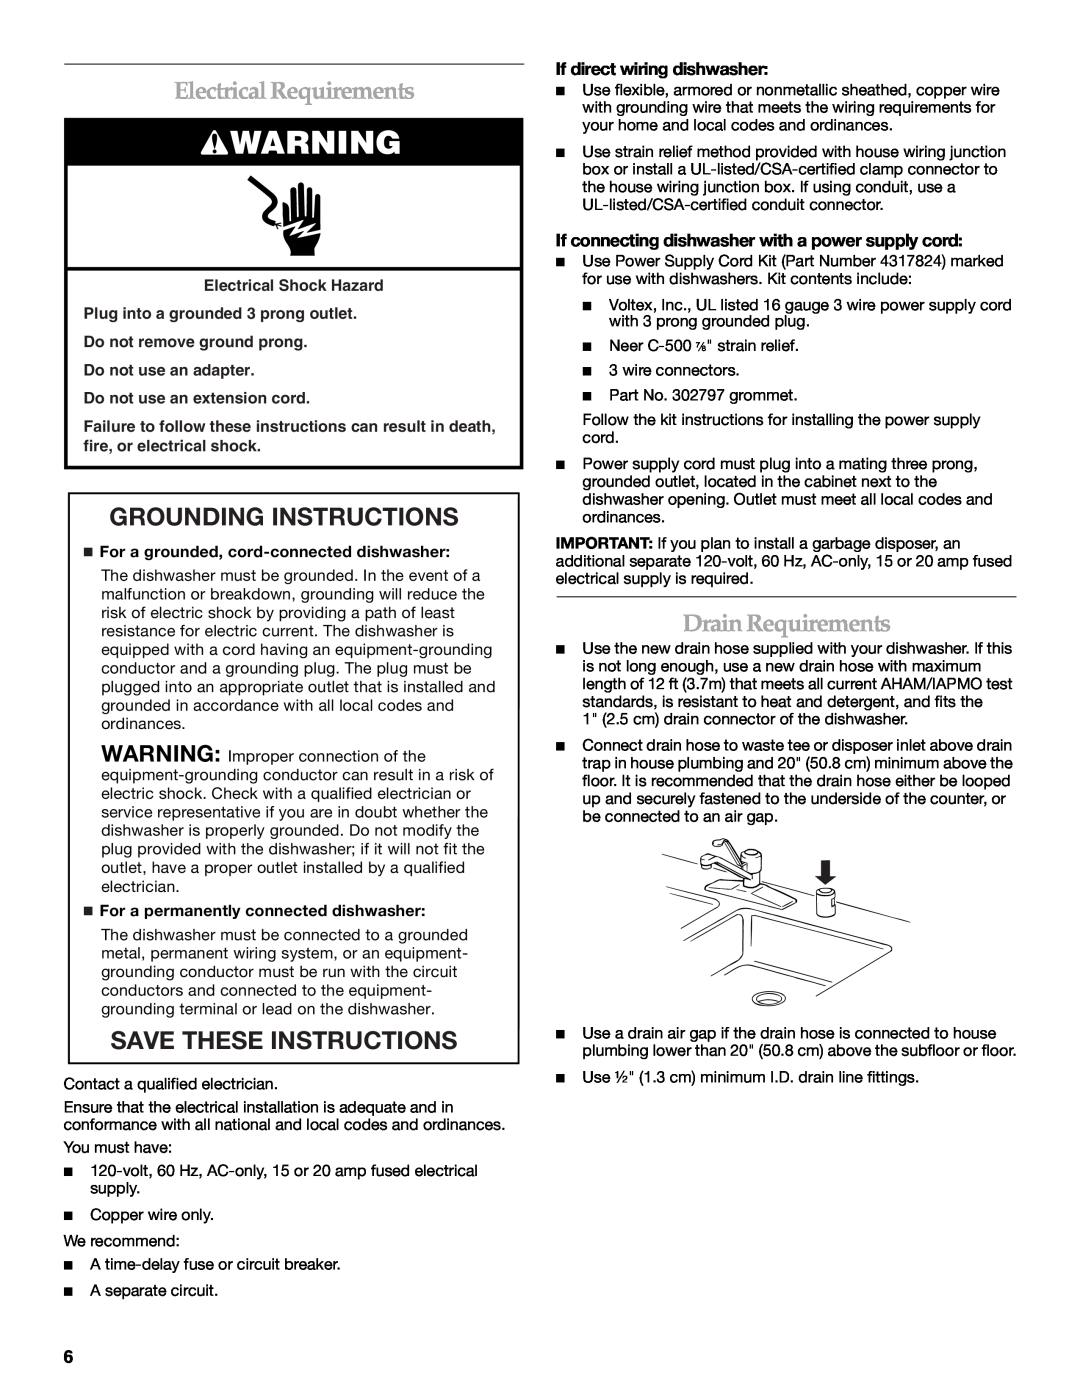 KitchenAid W10118037B Electrical Requirements, Grounding Instructions, Save These Instructions, Drain Requirements 